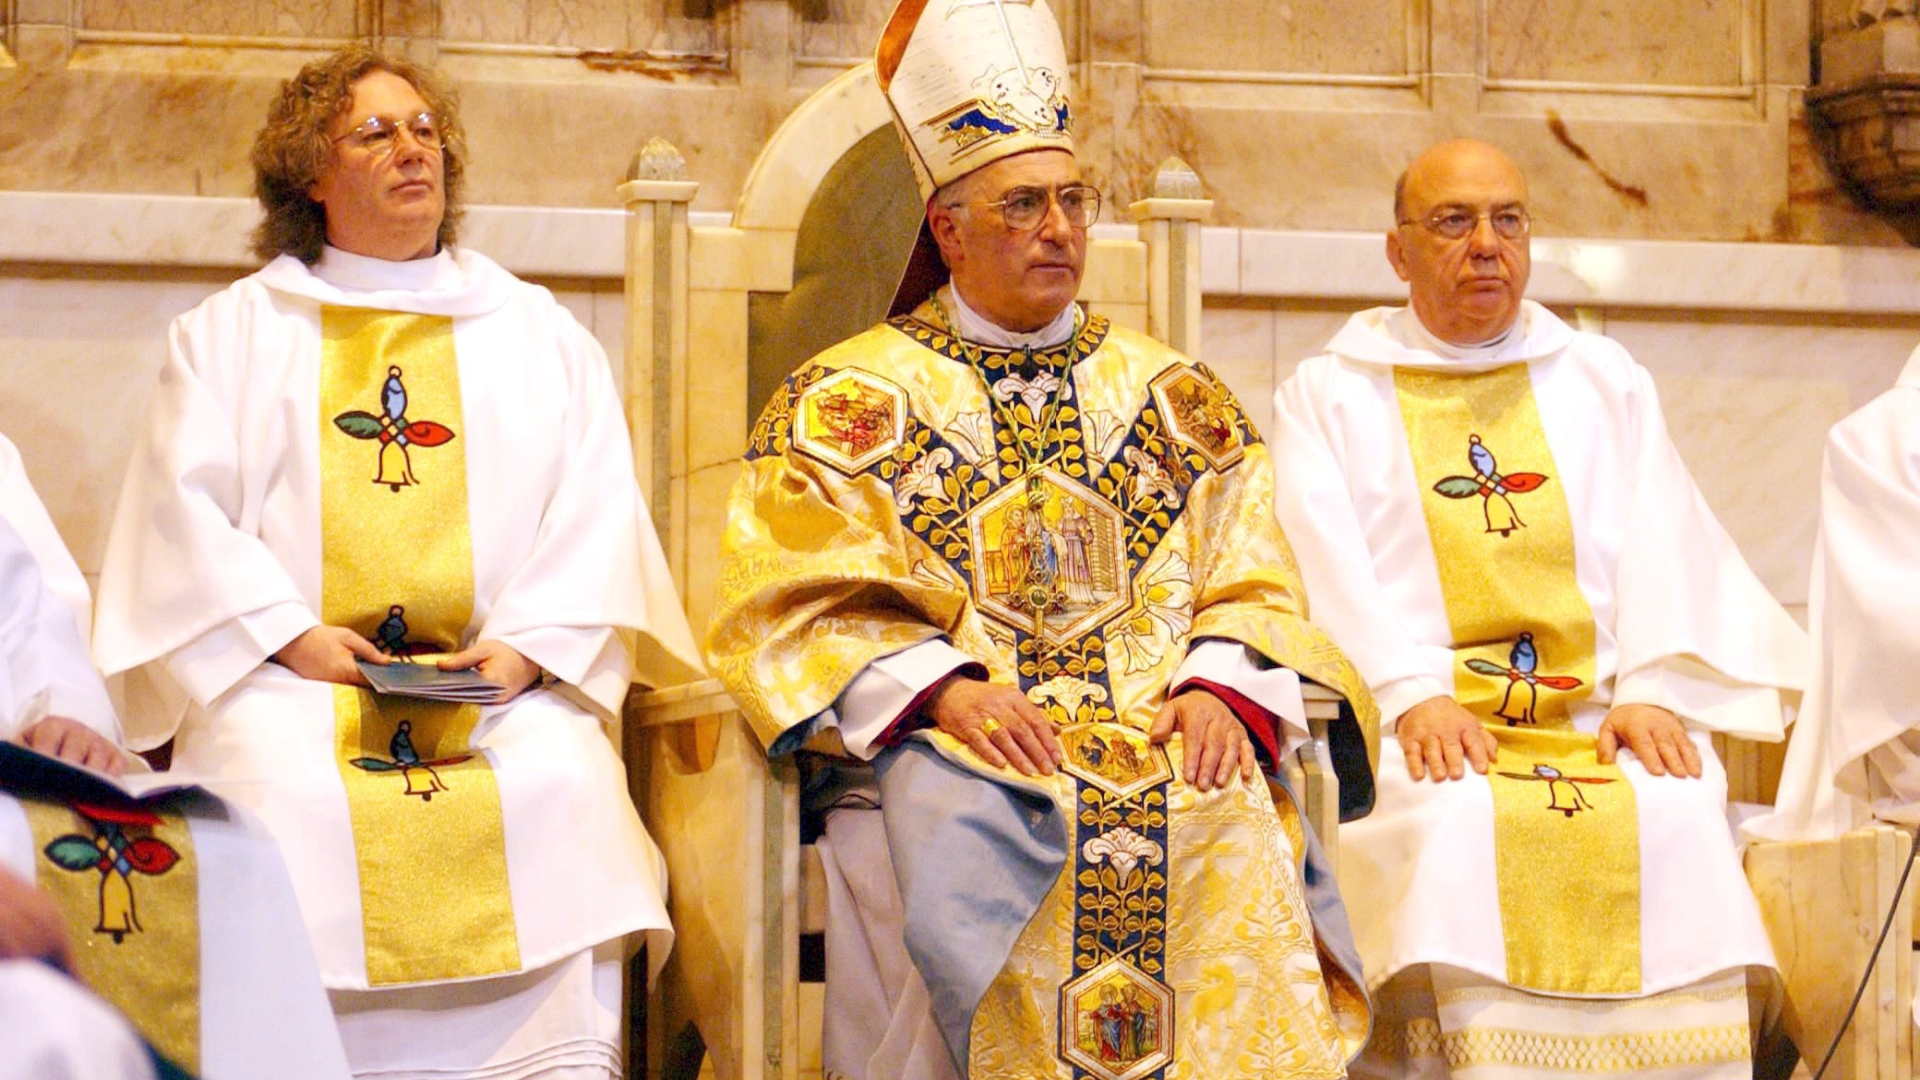 Archbishop Mario Conti at the mass to mark his installation in Glasgow in 2002